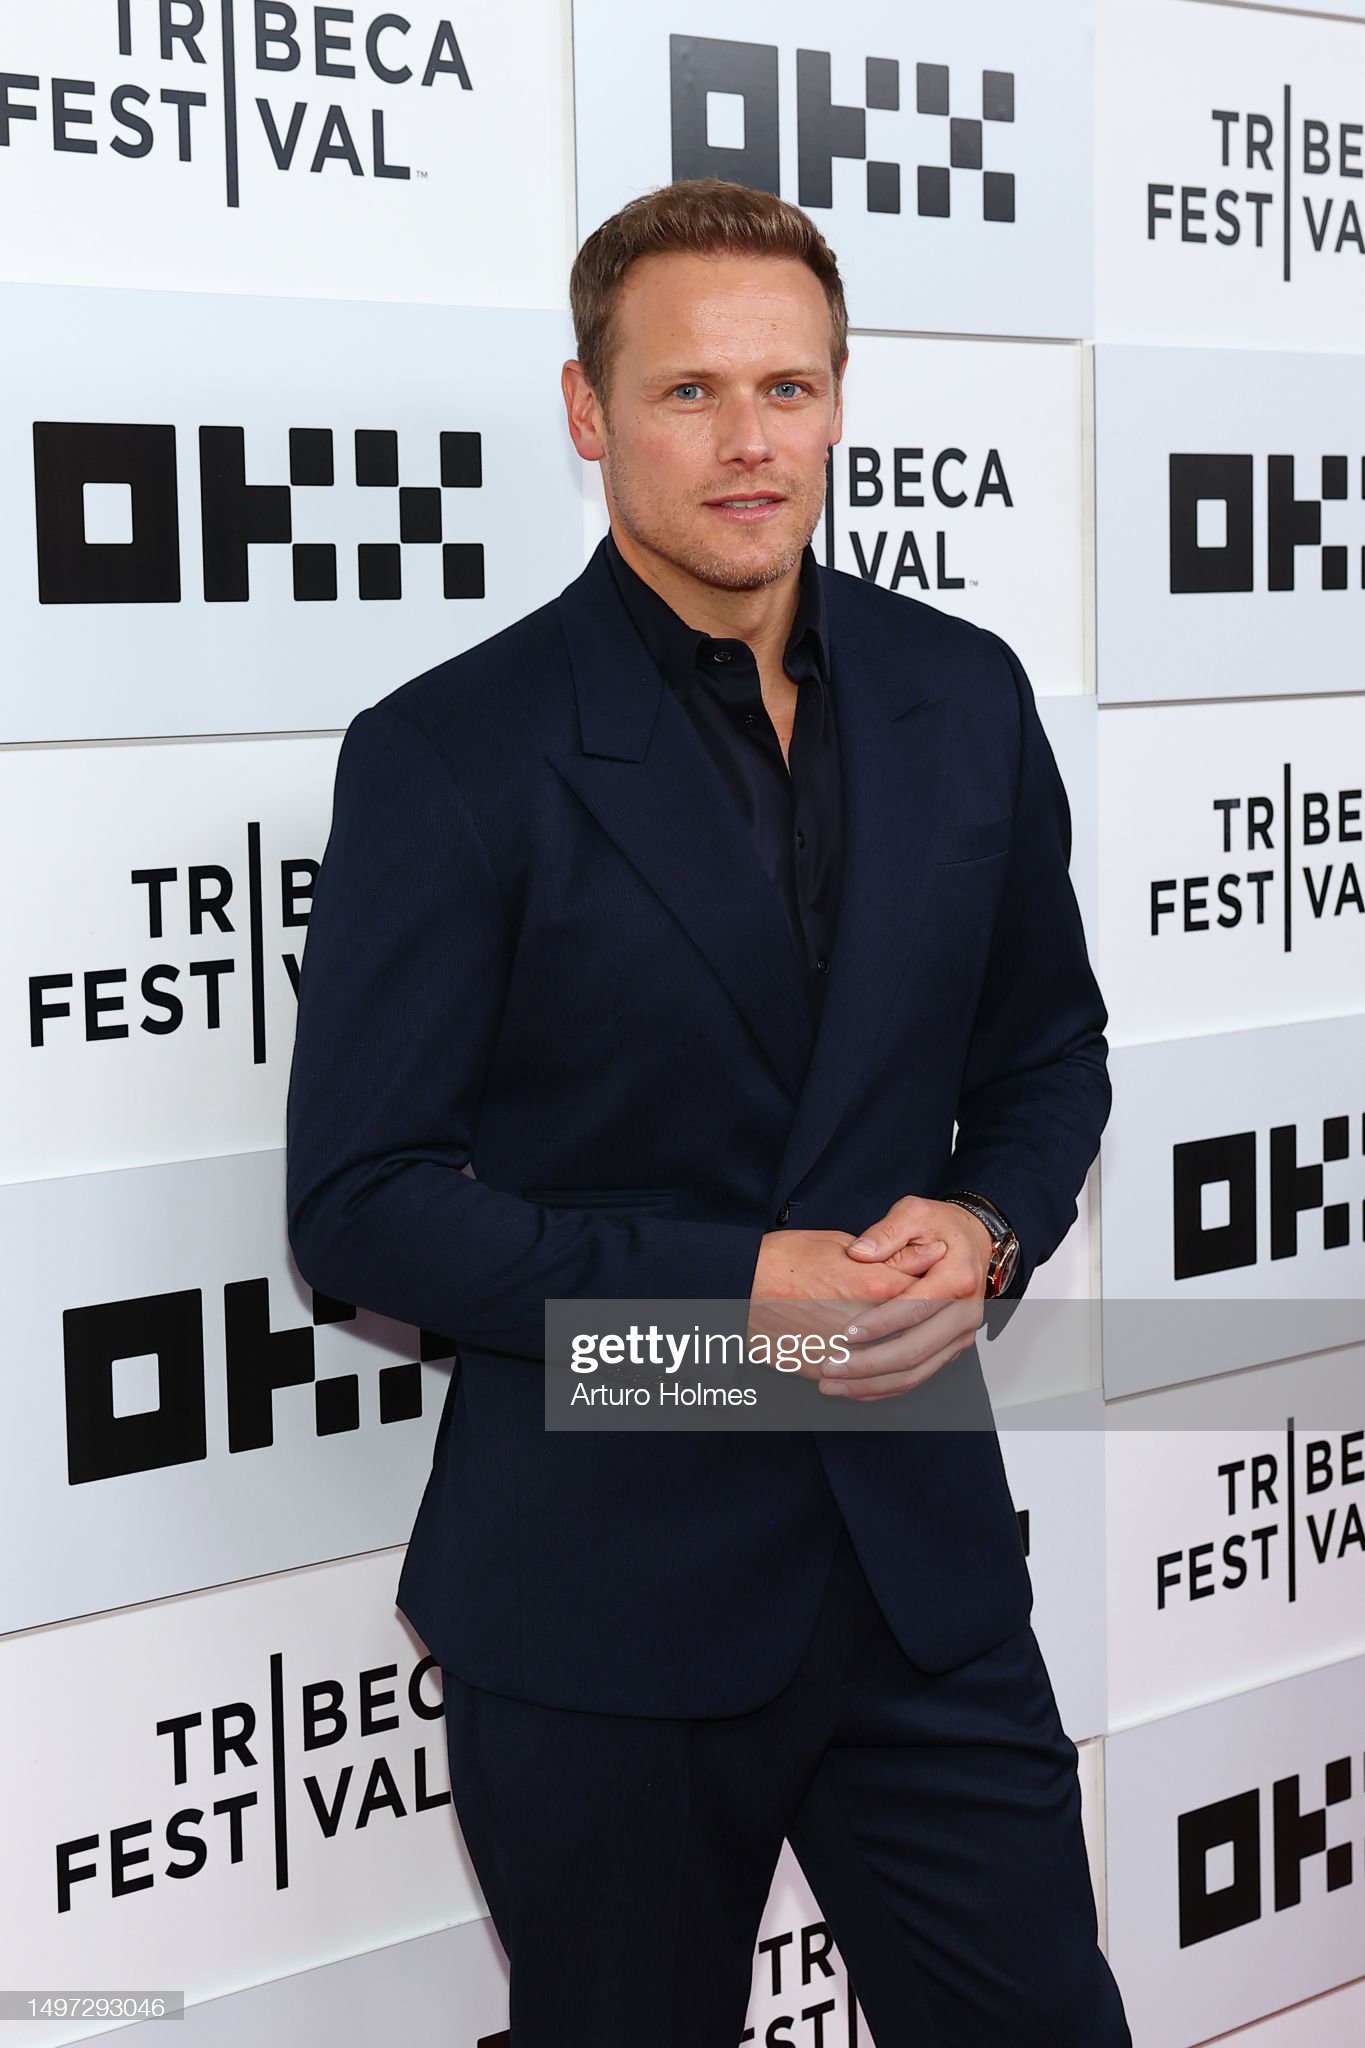 gettyimages-1497293046-2048x2048.jpg